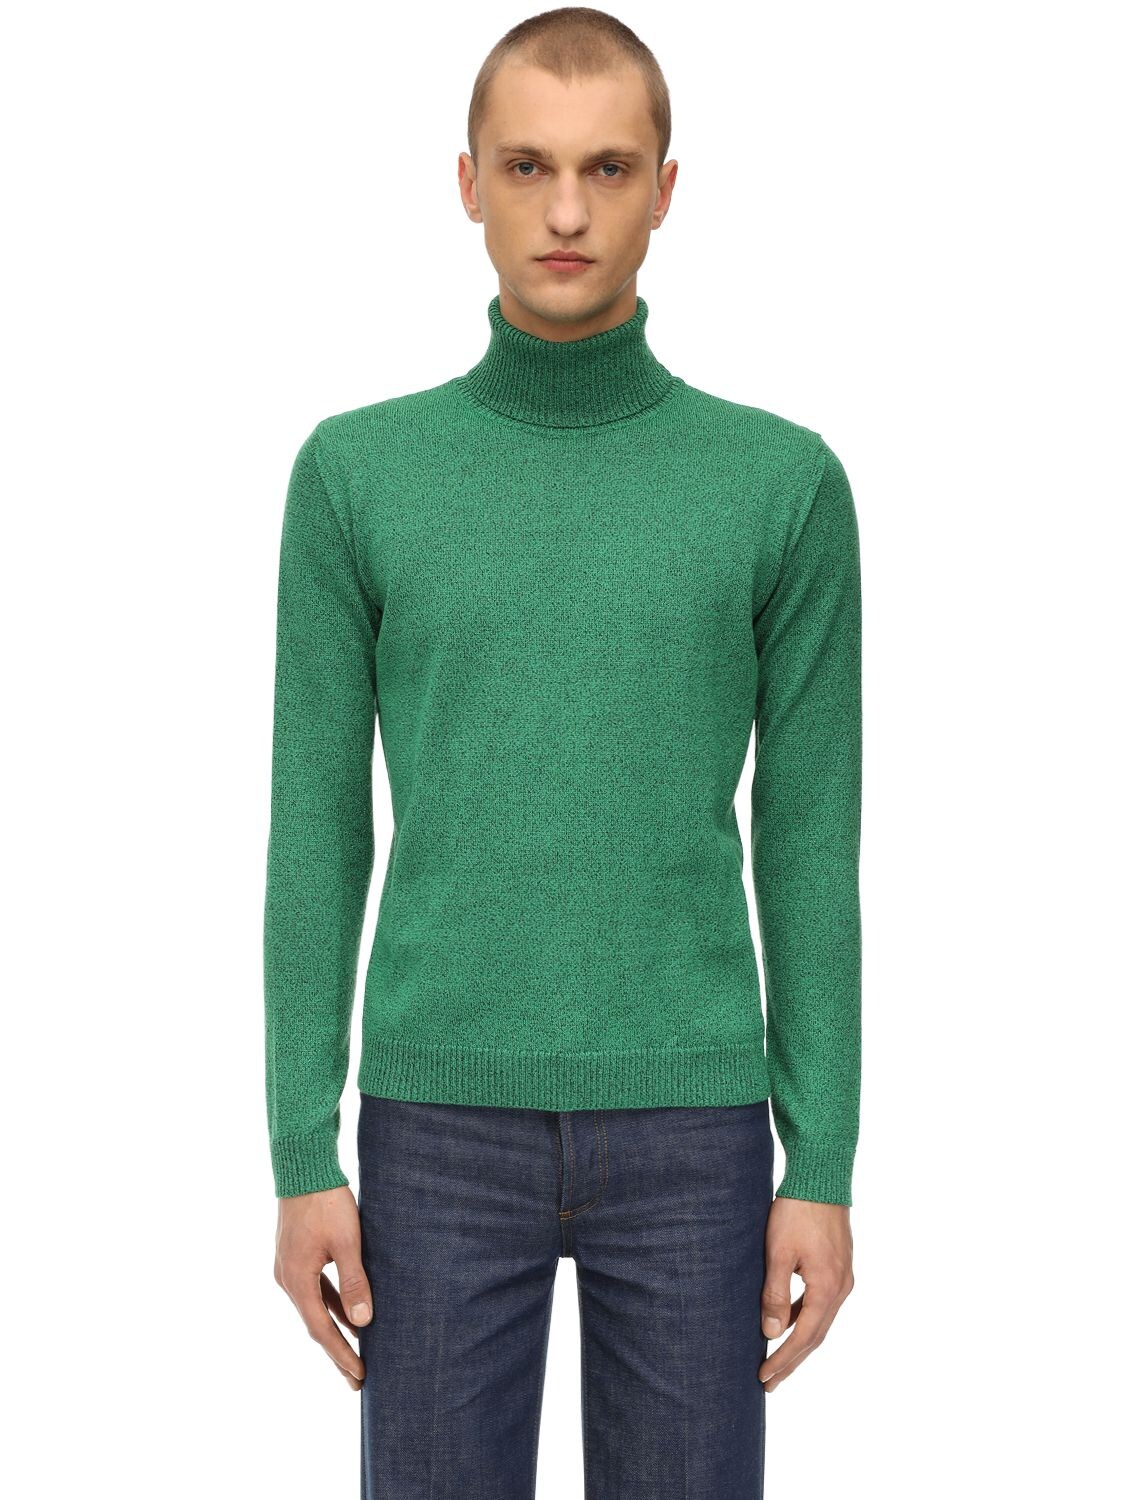 Gucci Lurex Cable Knit Turtleneck Sweater In Green